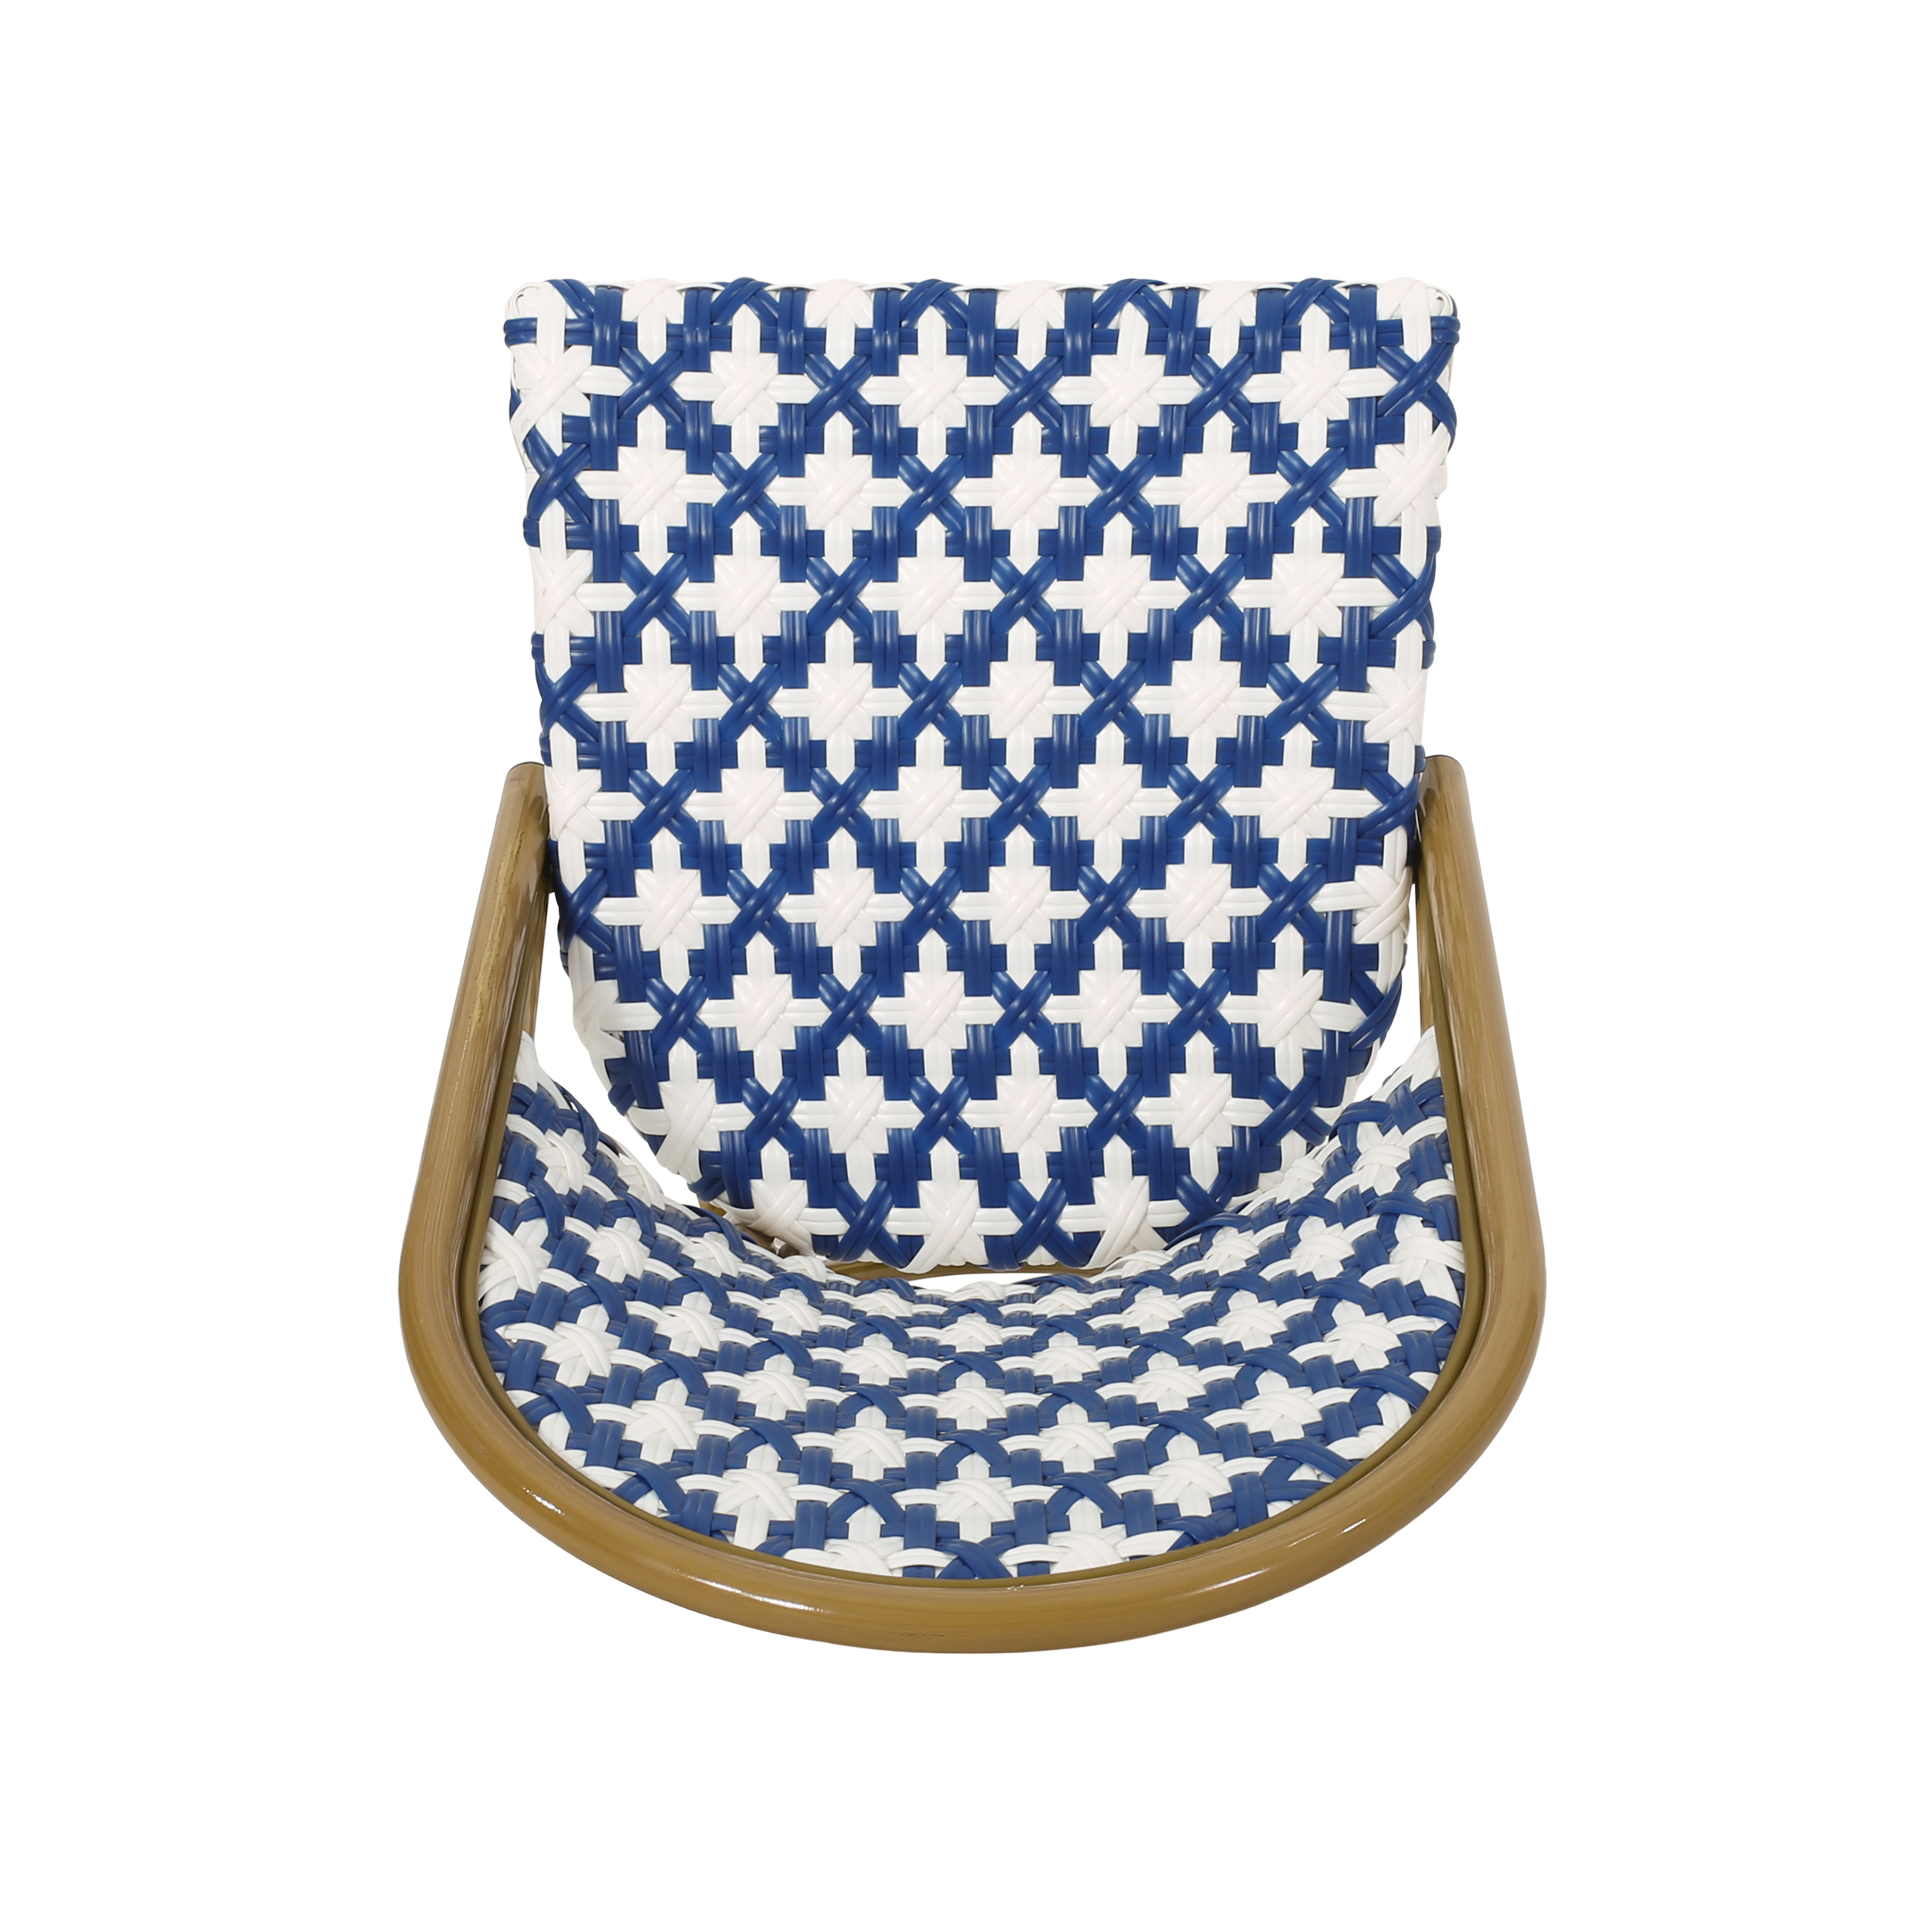 Brandon Outdoor French Bistro Chair, Set of 2, Blue, White, Bamboo Finish - image 3 of 8